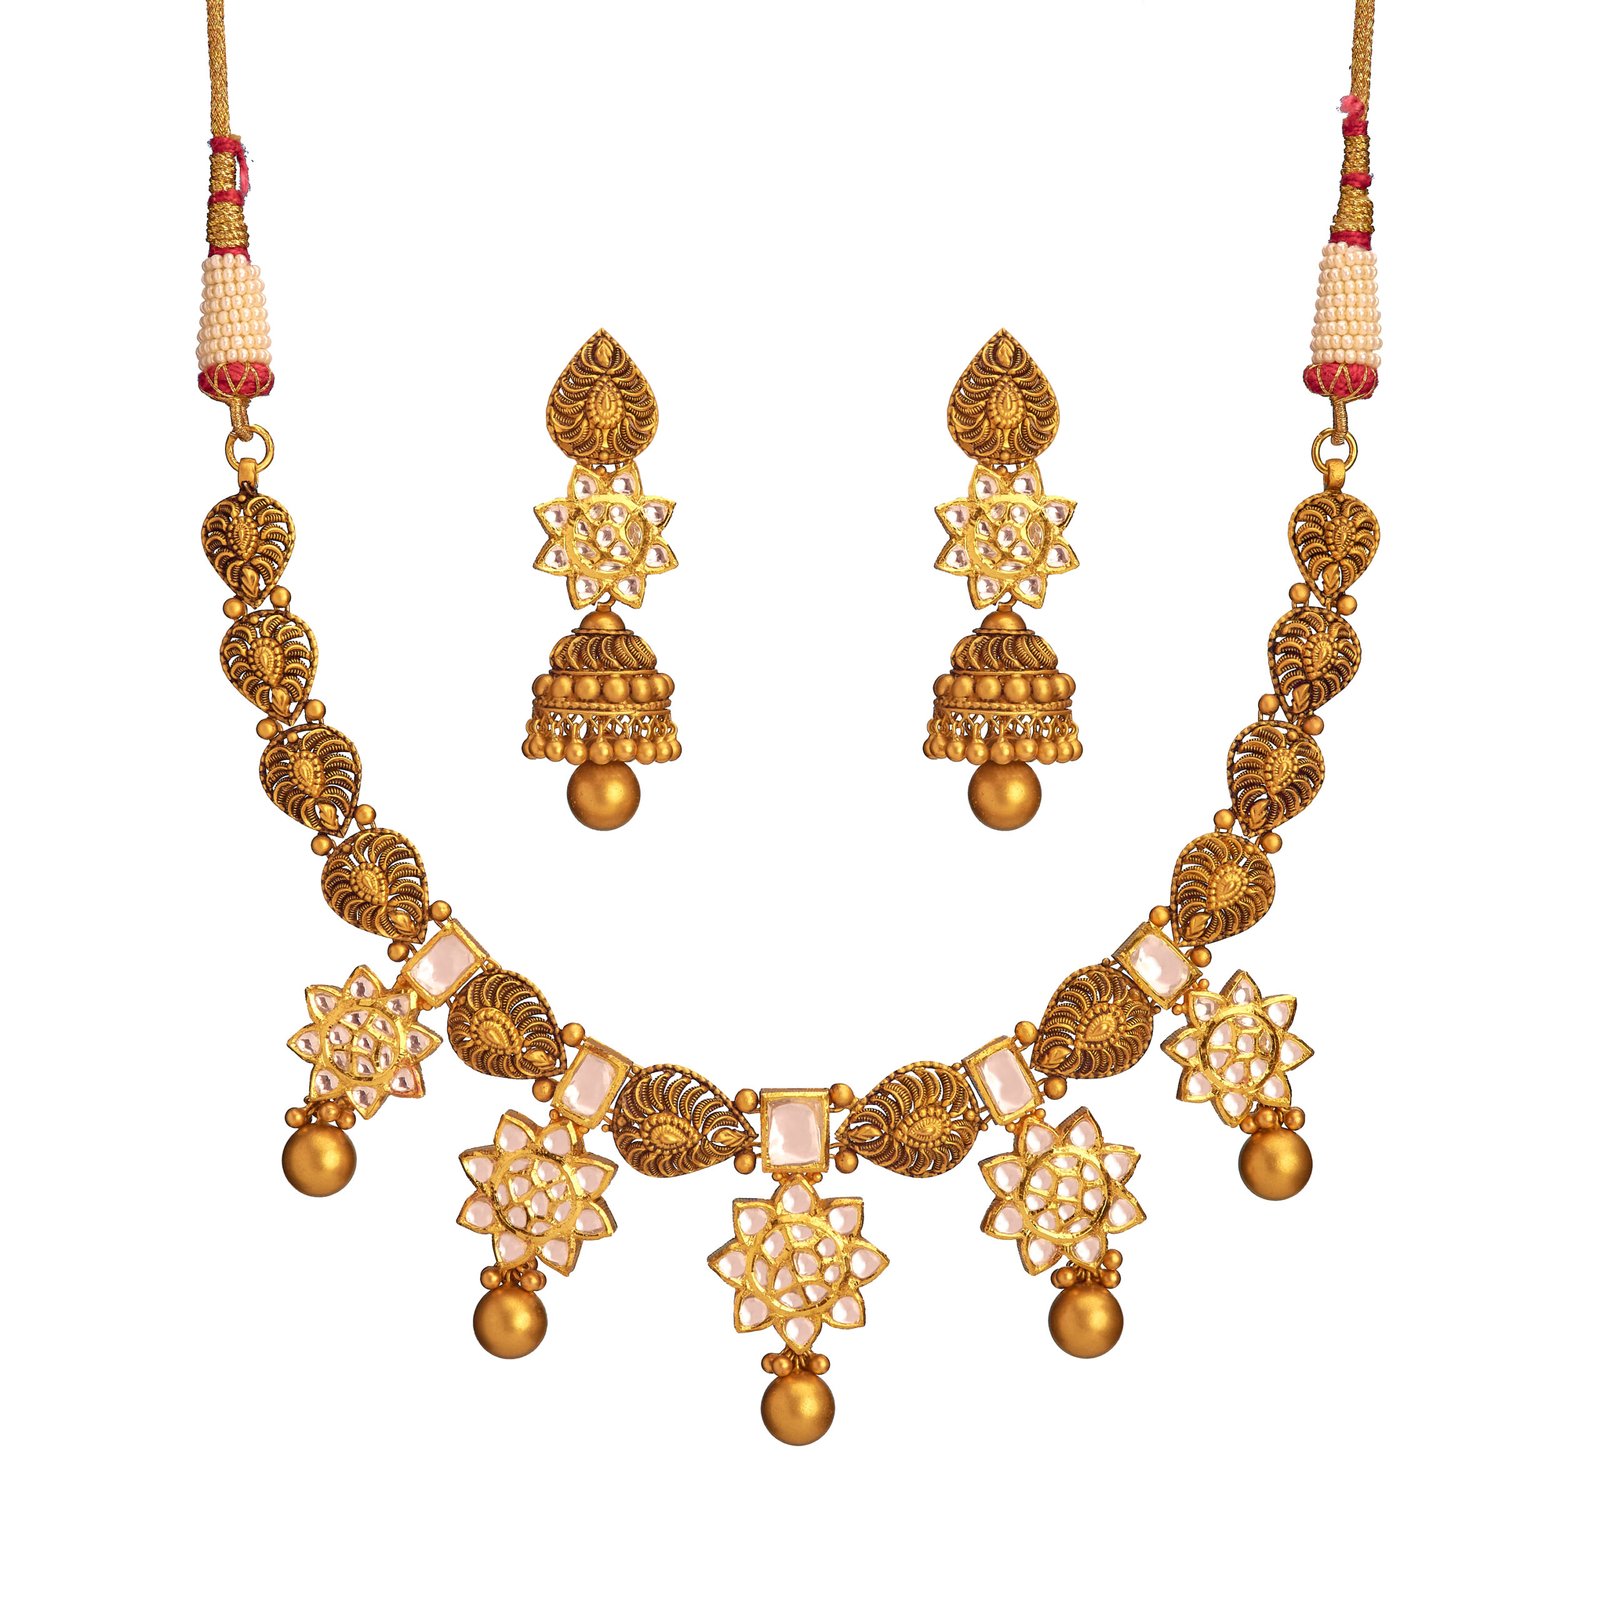 Gold Necklace - Sona Jewelers